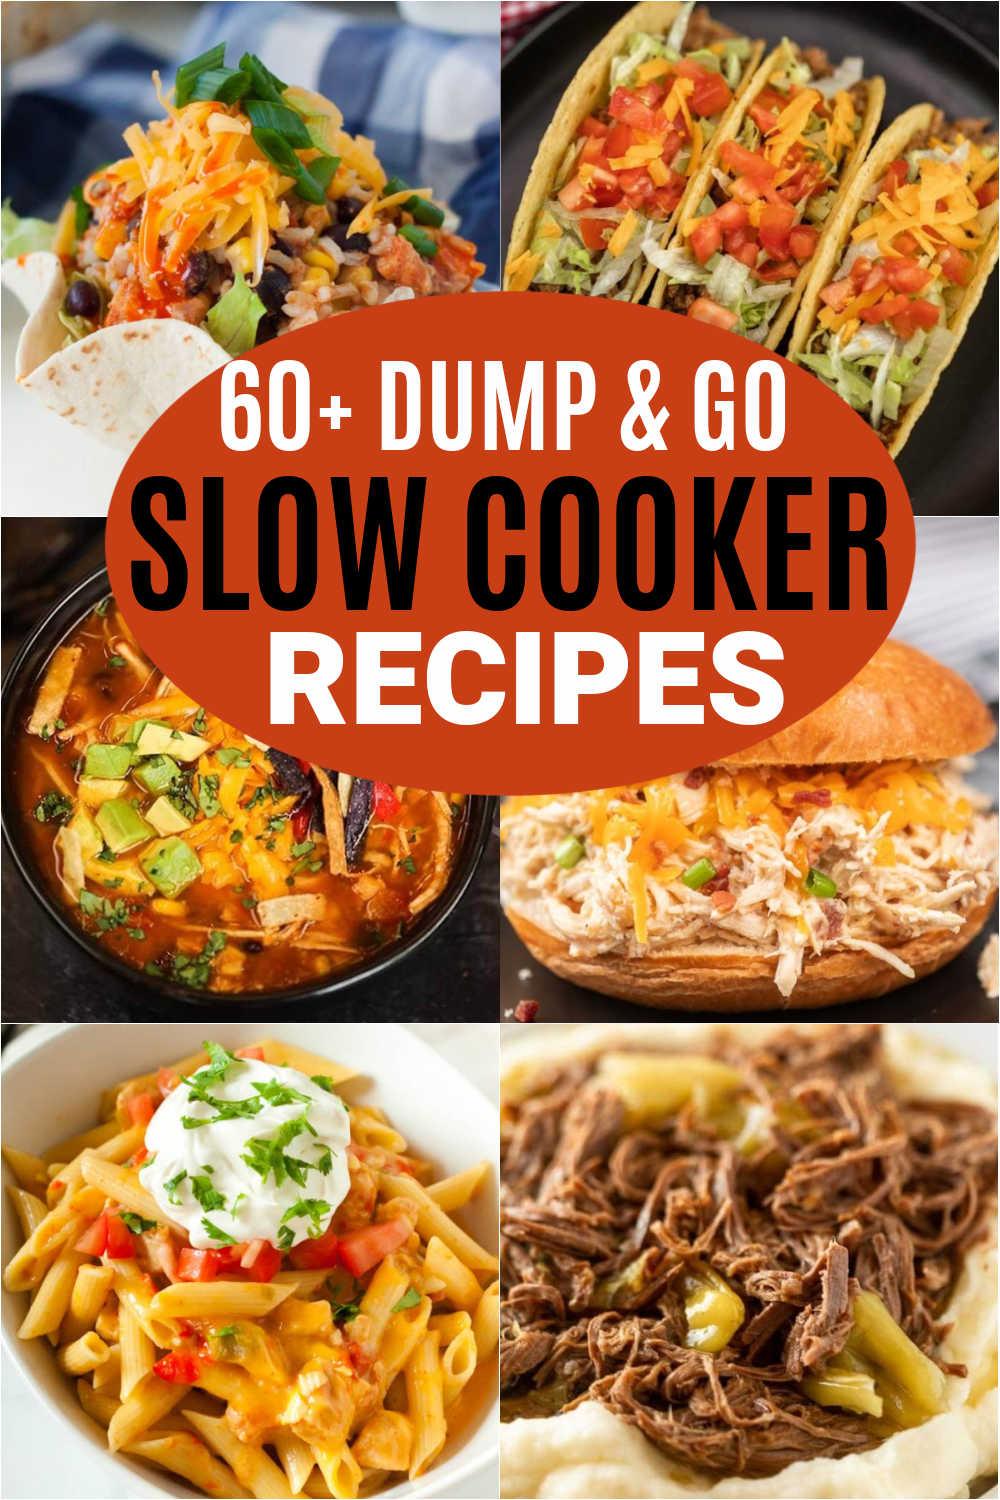 Check out over 60 dump and Go Slow Cooker Recipes that are easy to make in your favorite crock pot! These are easy crock pot recipes that the entire family will loves.  #eatingonadime #dumpandgo #slowcookerrecipes #crockpotrecipes #easydinners ?
